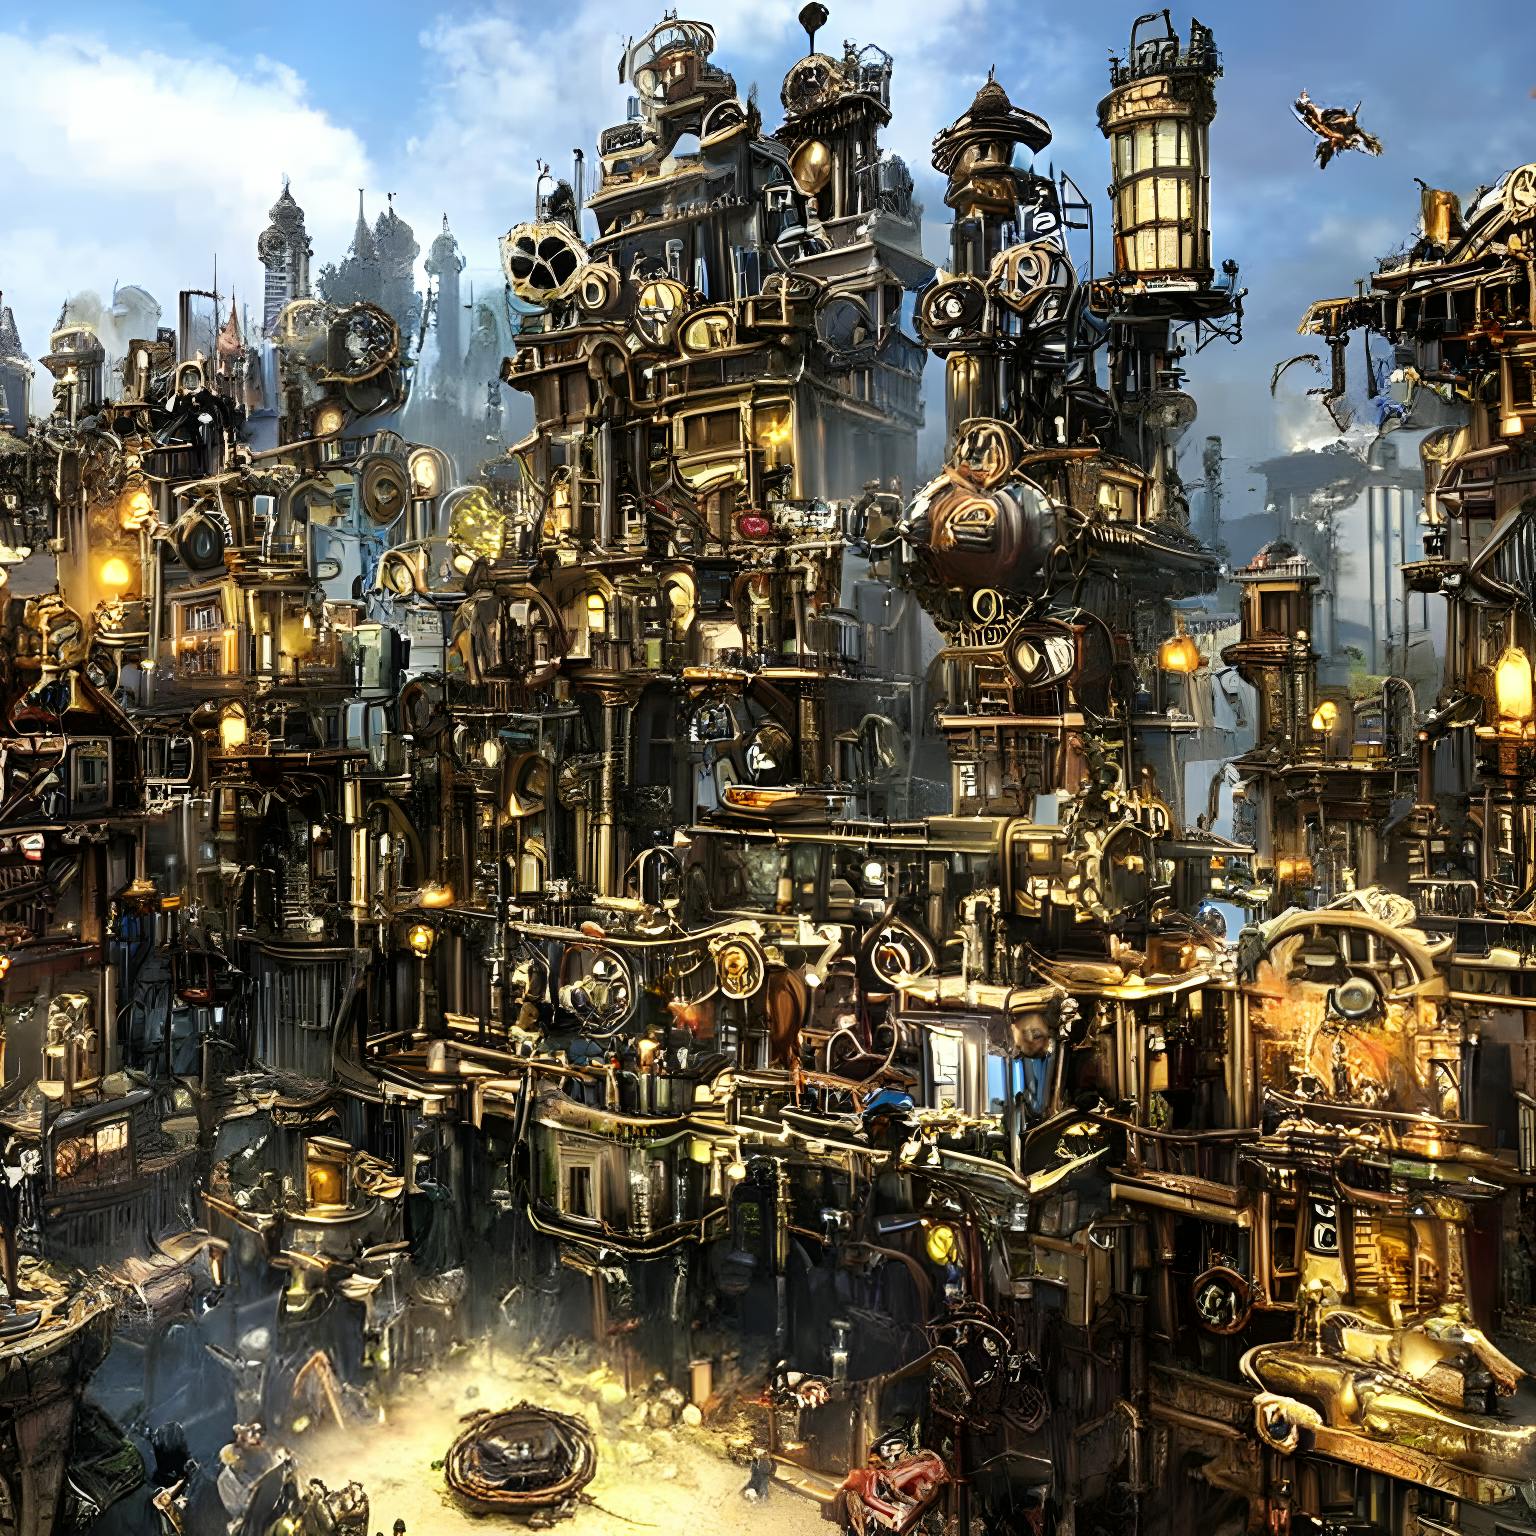 The History and Aesthetic of Steampunk: Could We Build a Steampunk World?